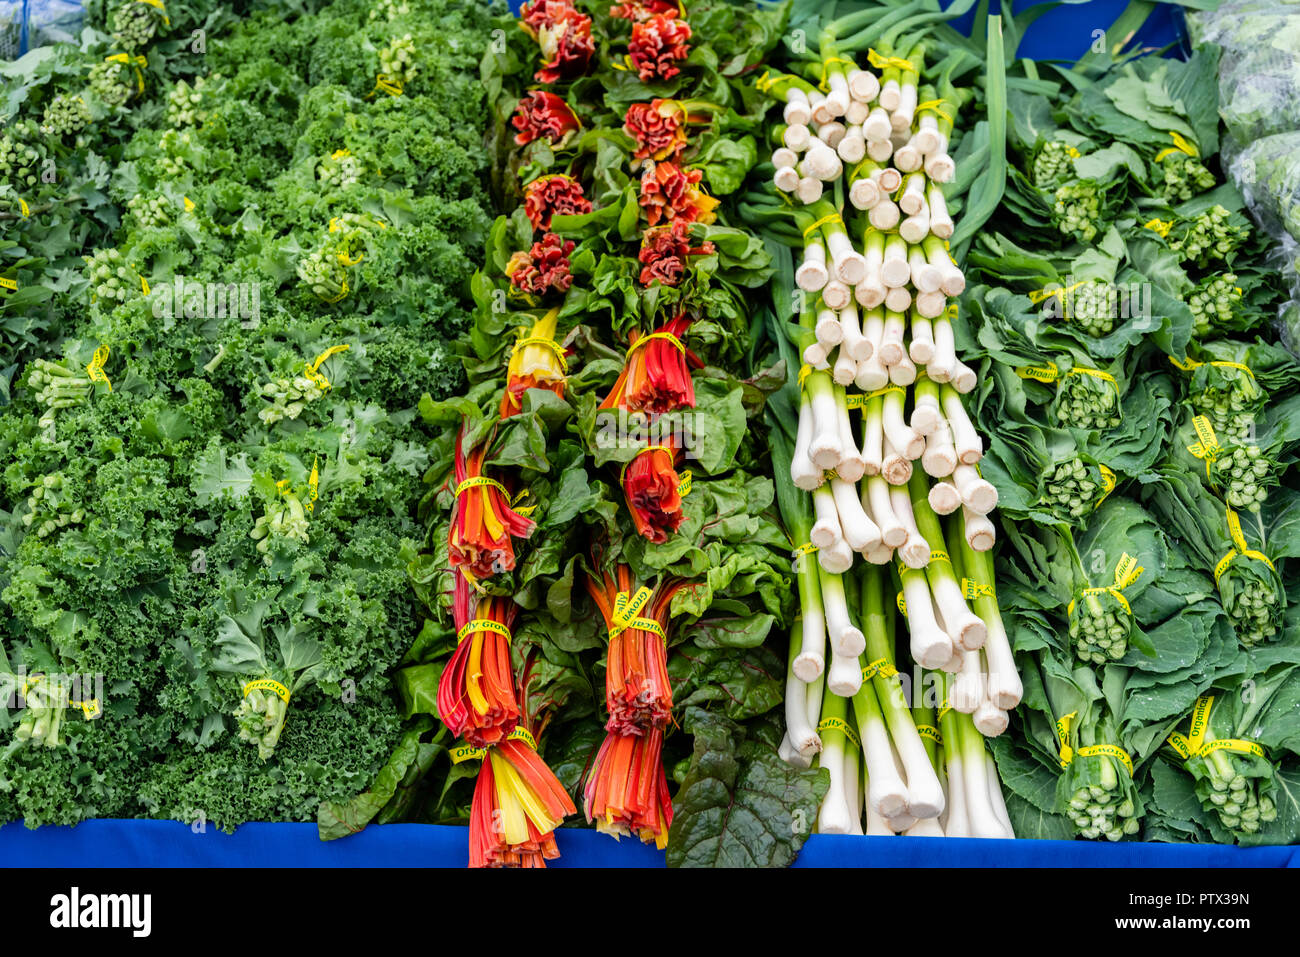 Fresh produce including leeks and swiss chard on display at the farmers market Stock Photo